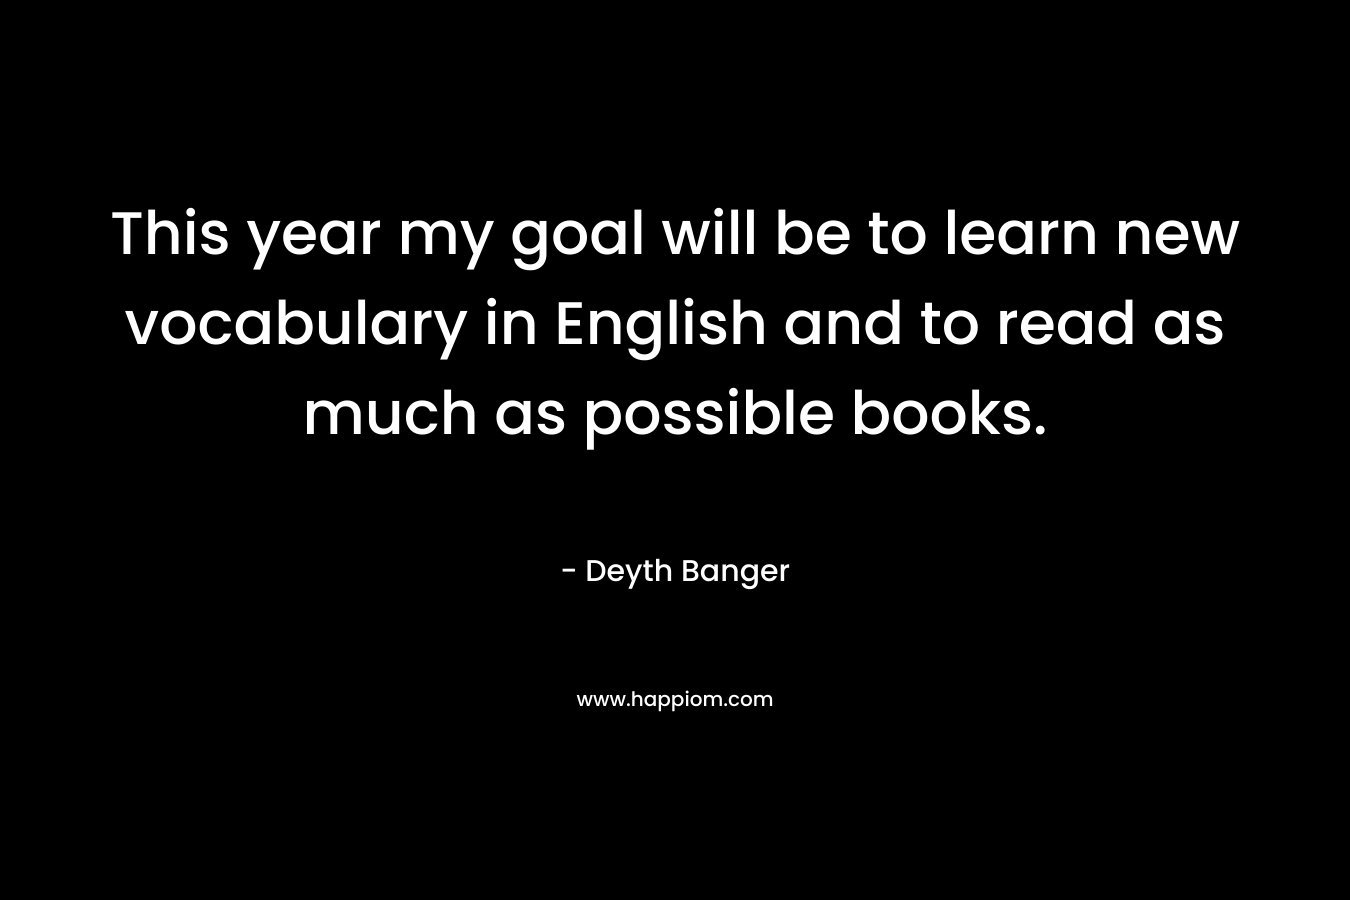 This year my goal will be to learn new vocabulary in English and to read as much as possible books. – Deyth Banger